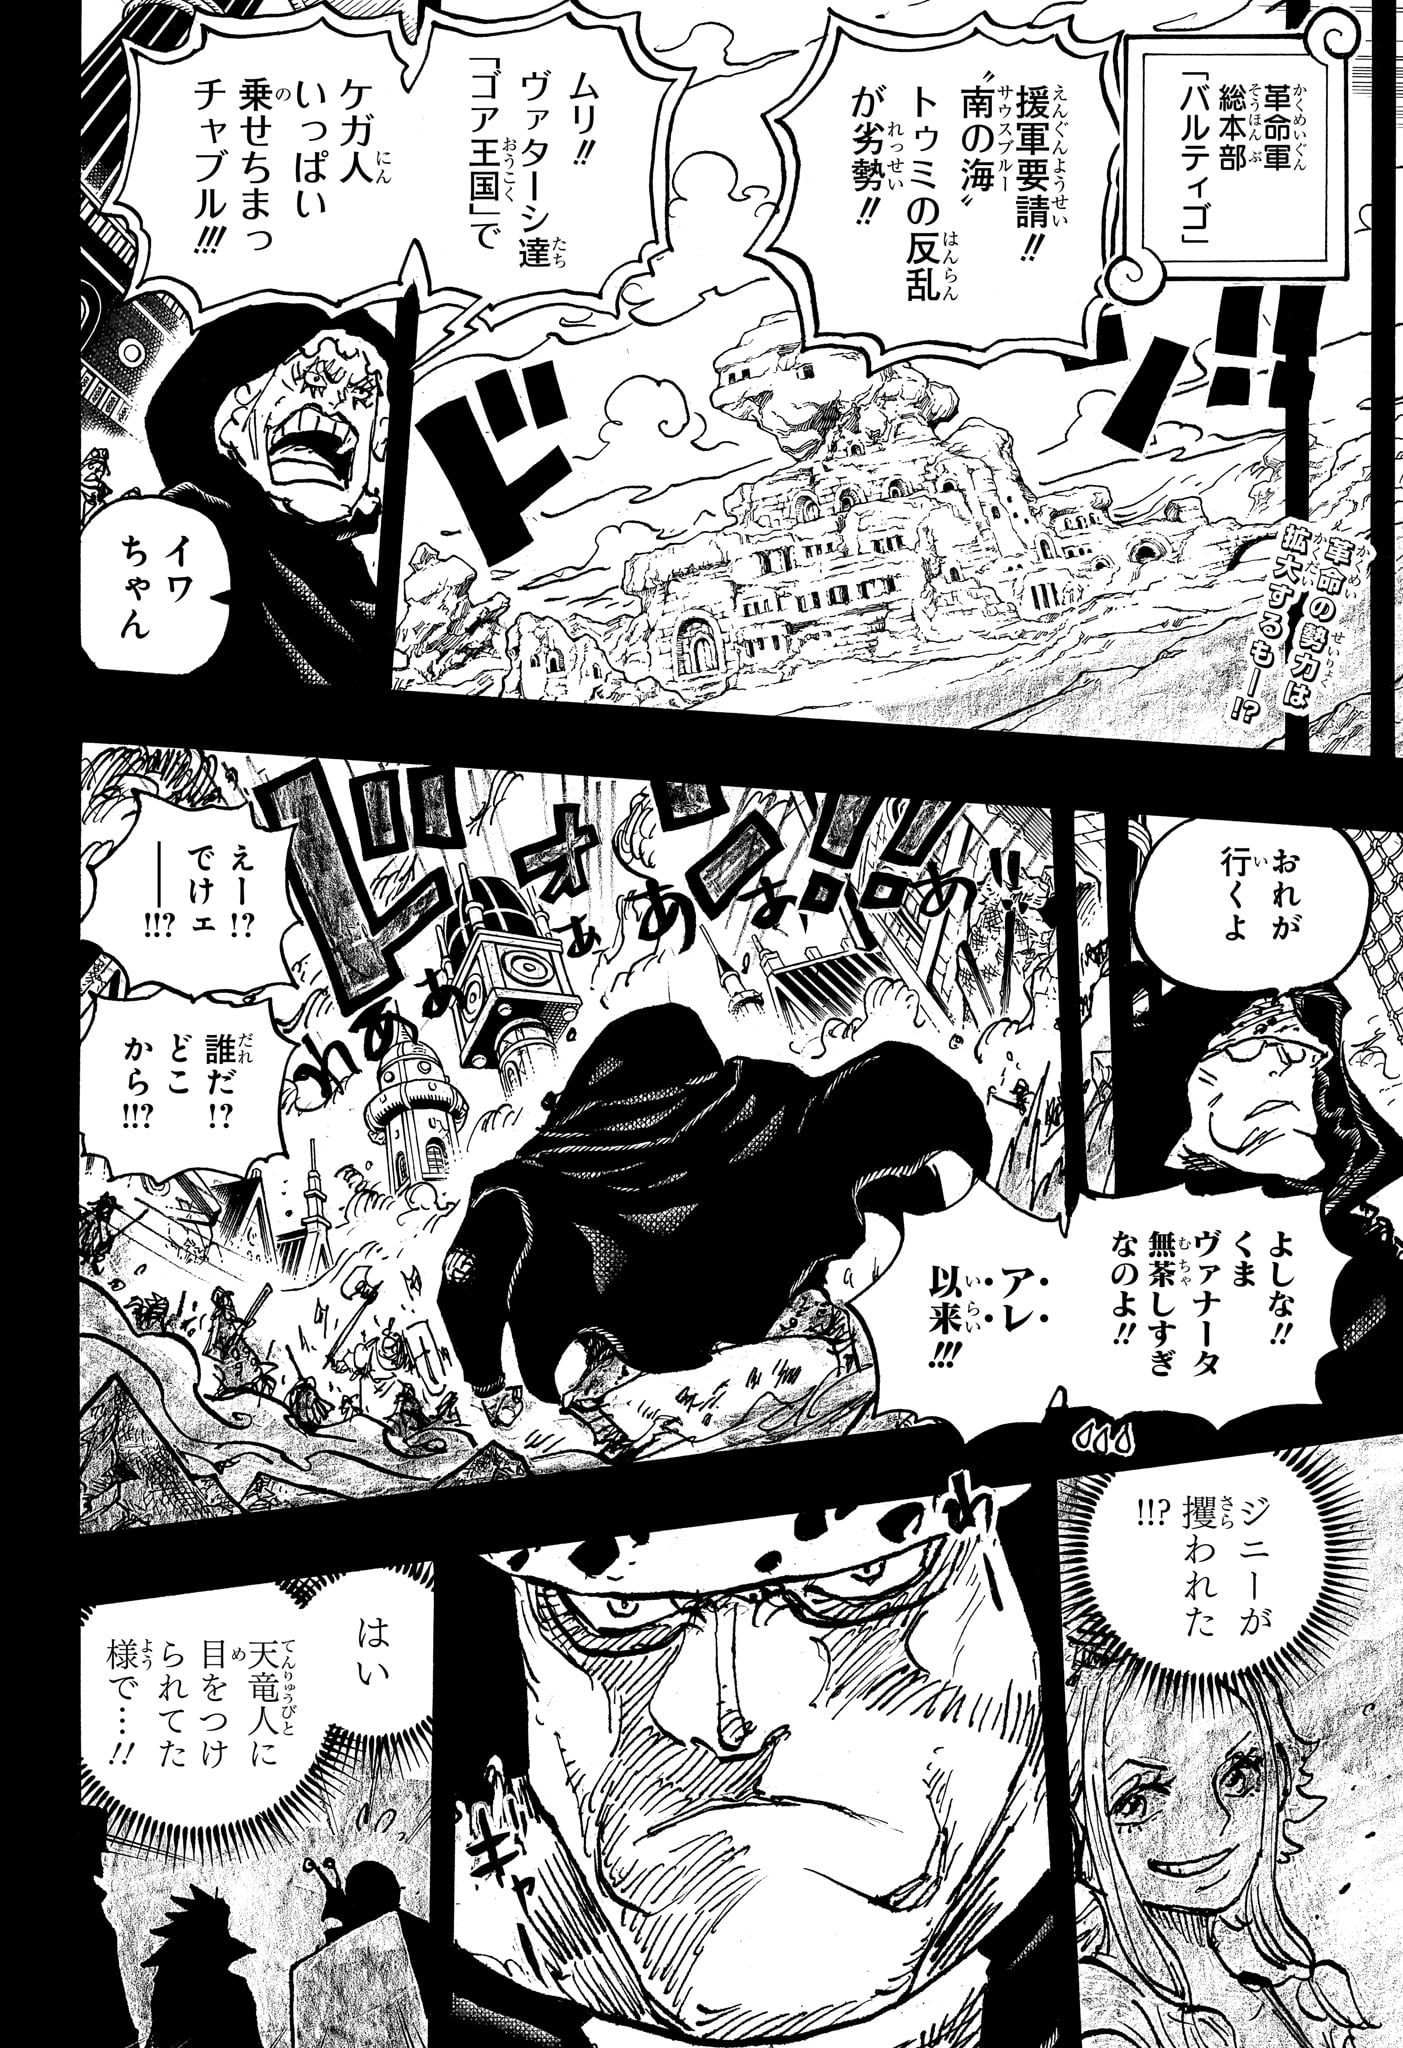 One Piece - Chapter 1098 - Page 2